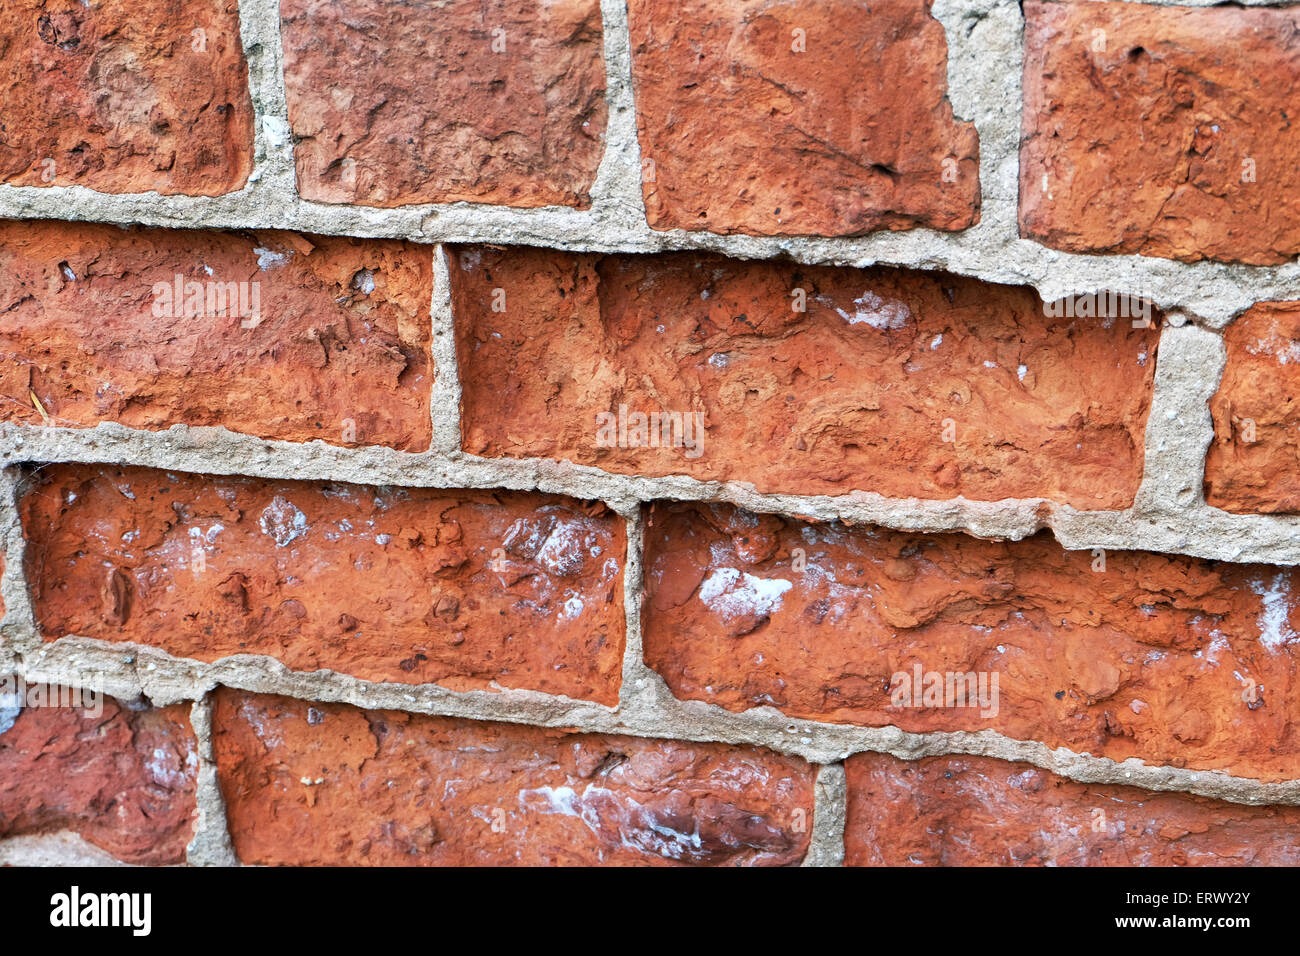 Old bricks corroding in wall with stronger concrete. Stock Photo